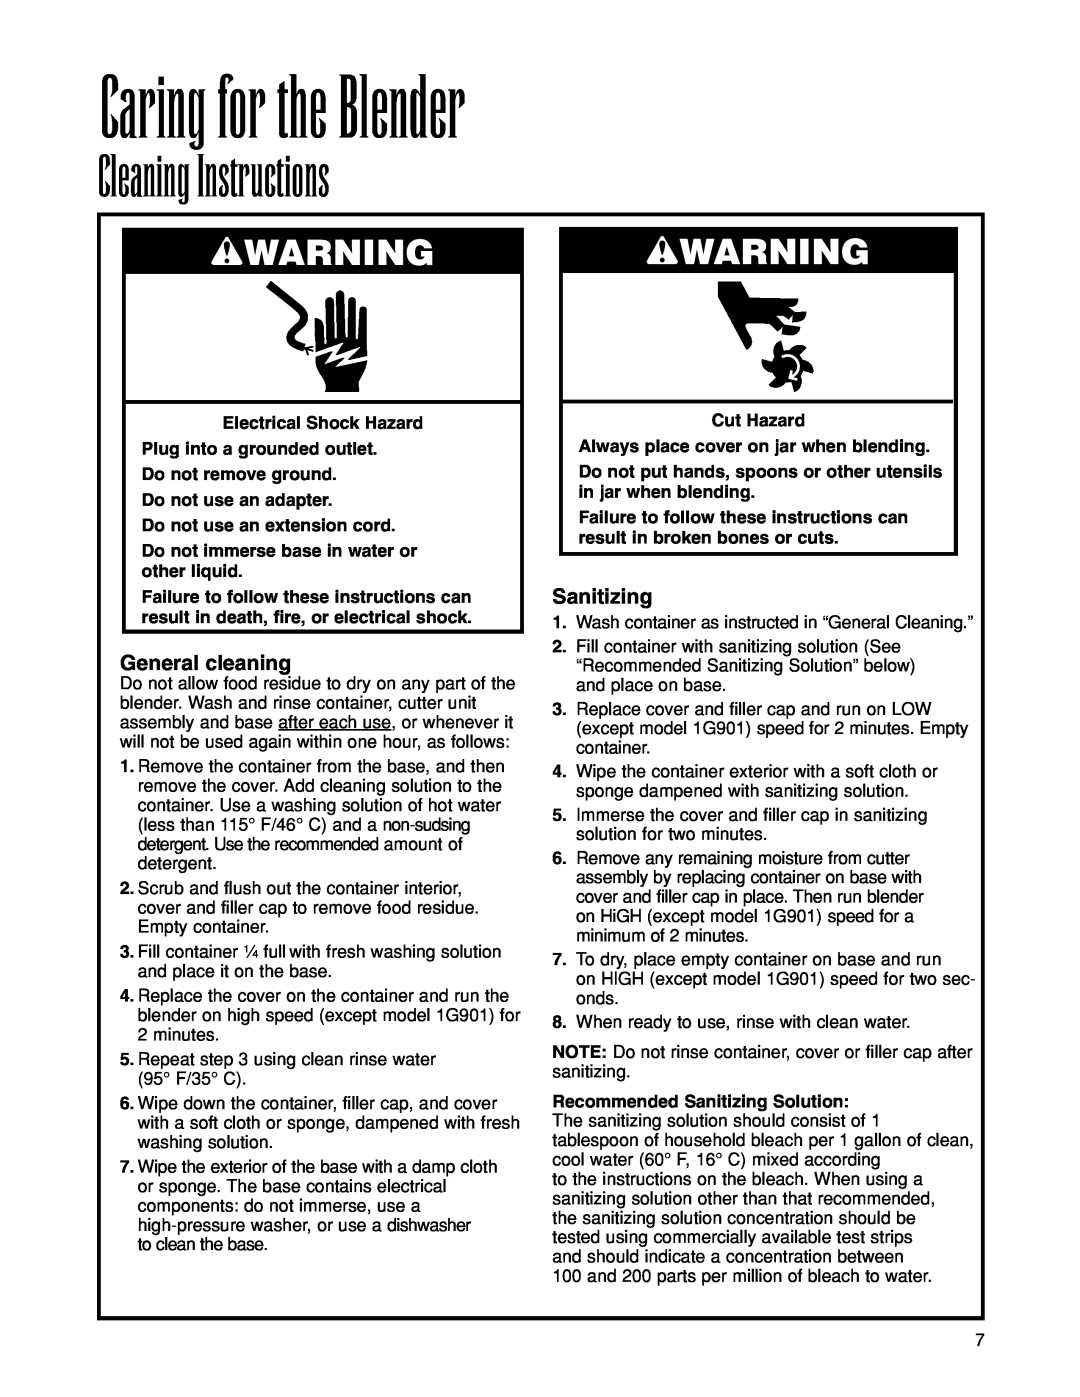 Hamilton Beach 1G901 operation manual Caring for the Blender, Cleaning Instructions, General cleaning, Sanitizing, wWARNING 